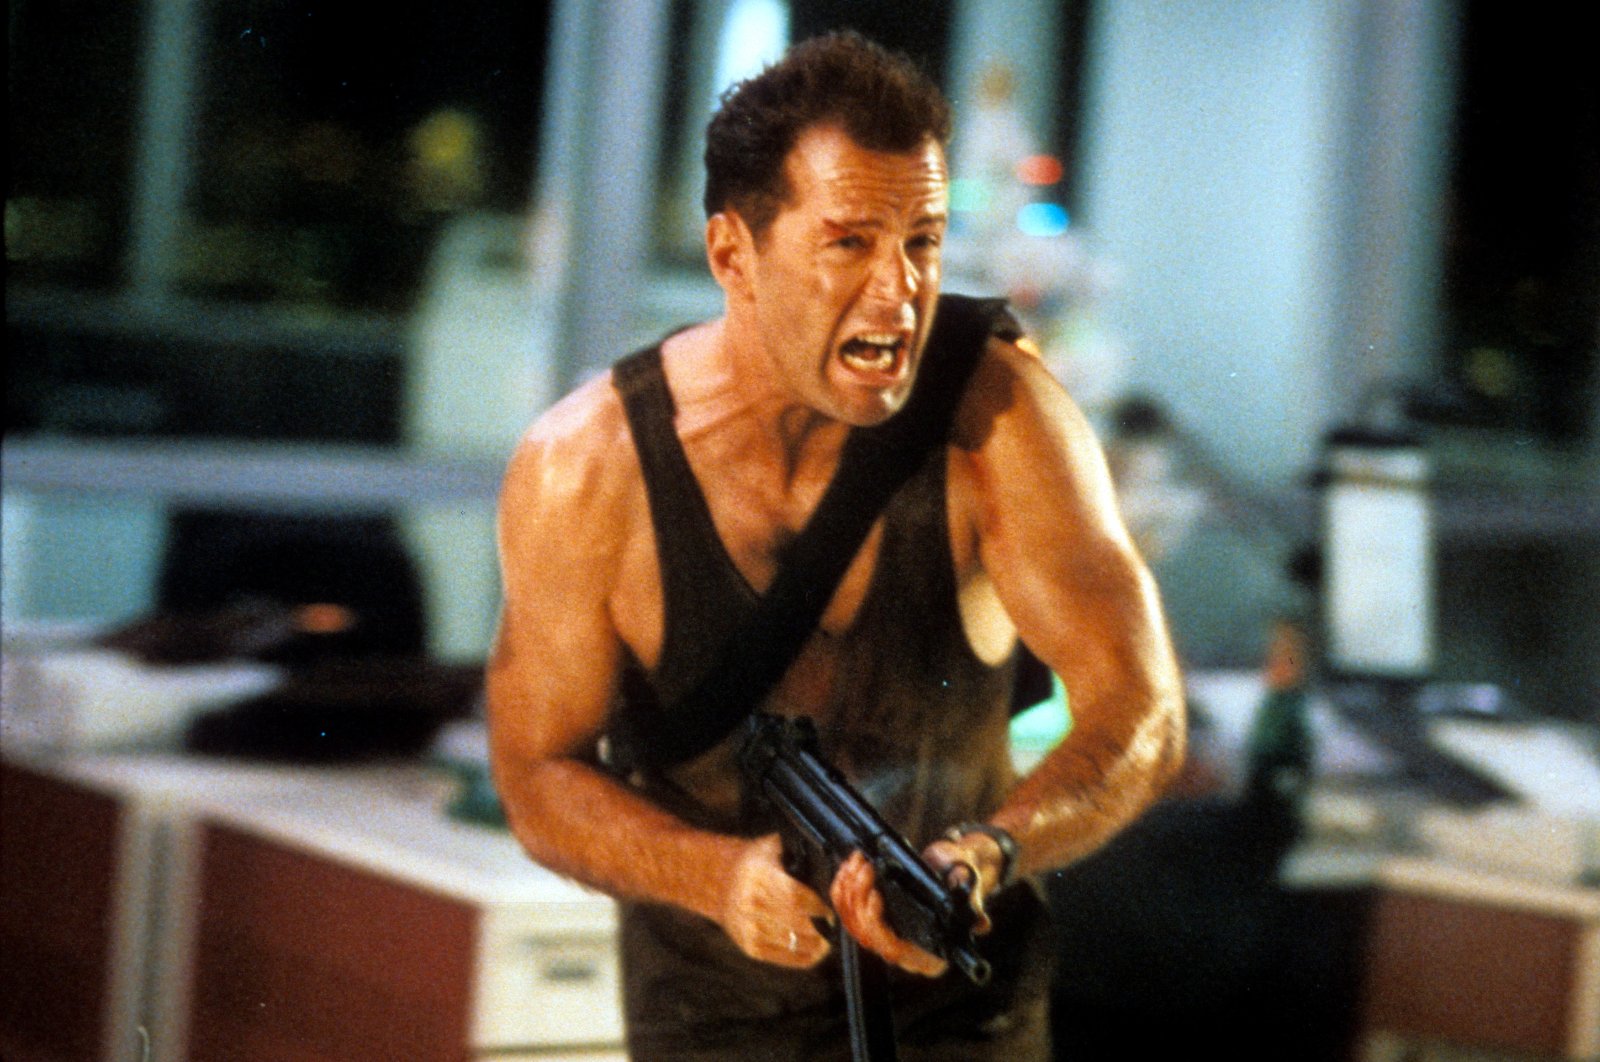 Bruce Willis runs with an automatic weapon in a scene from the film &#039;Die Hard,&#039; 1988. (Getty Images)